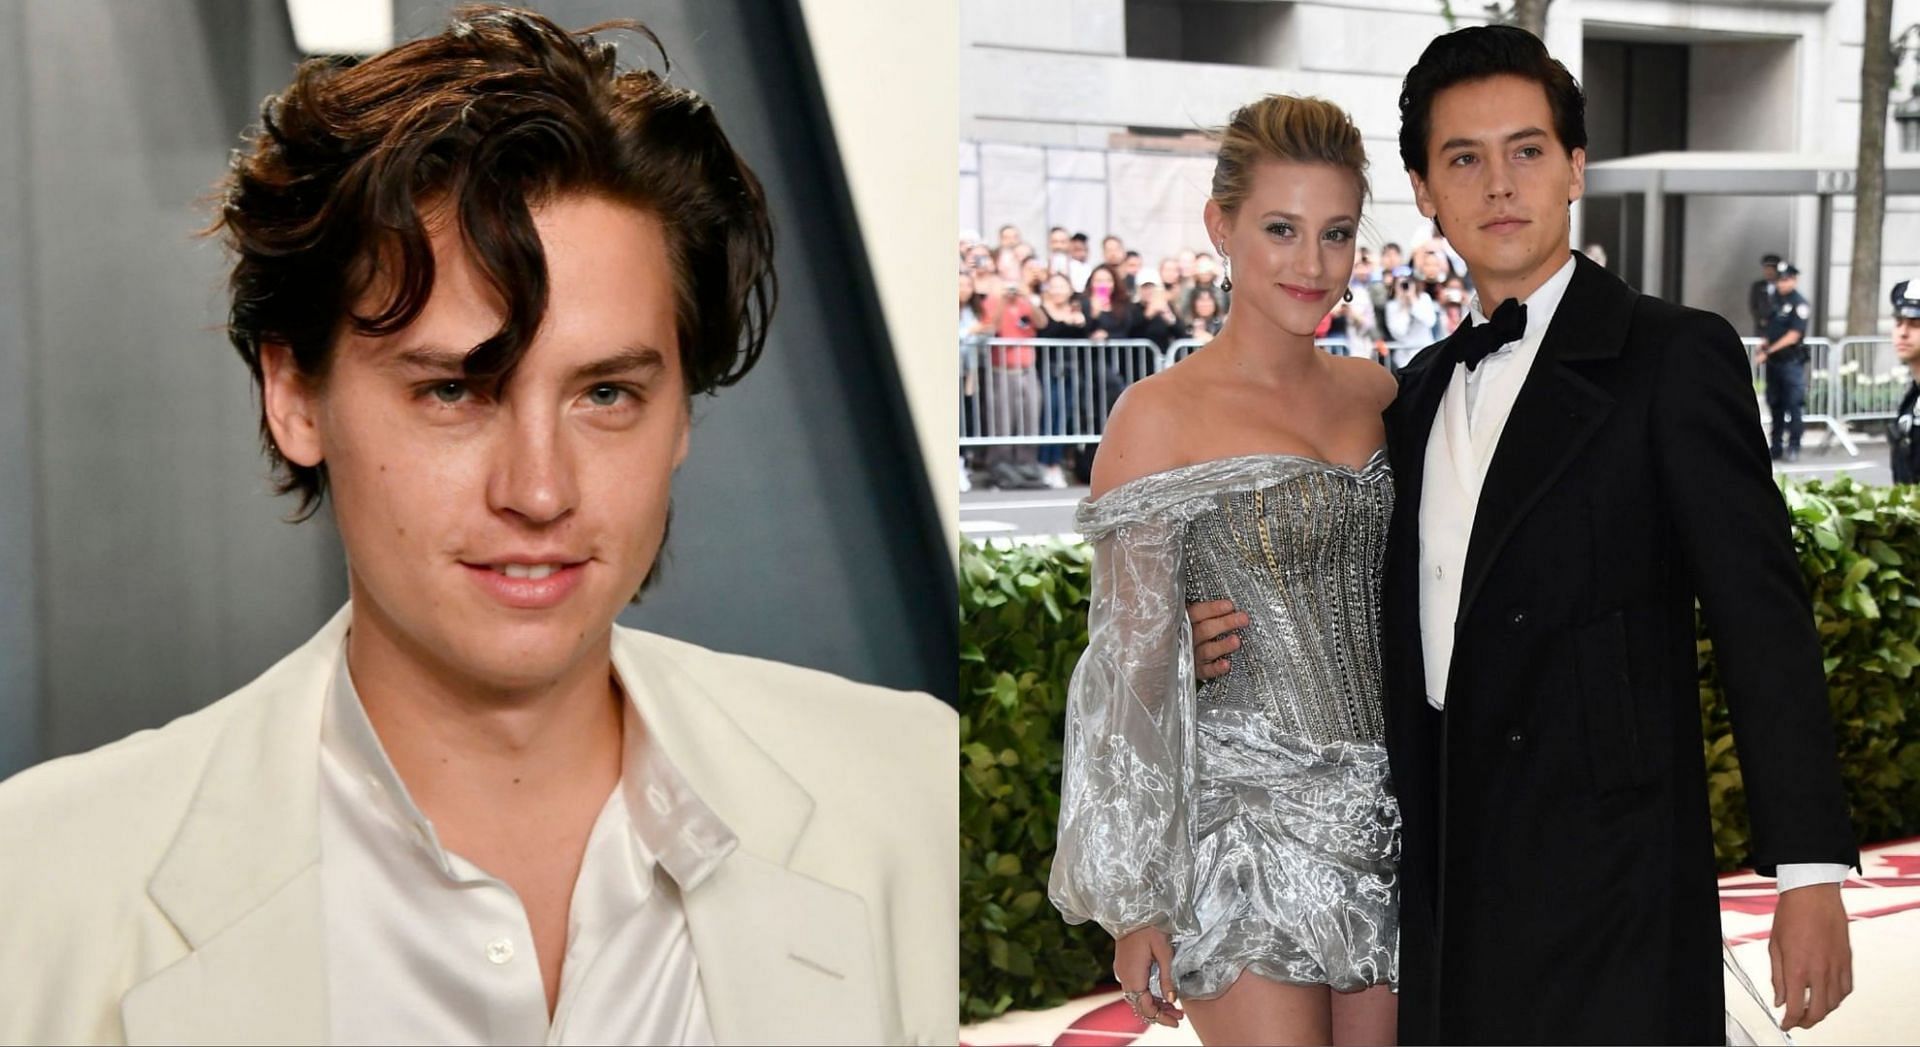 Twitter thread claiming Cole Sprouse was allegedly &quot;emotionally abusive&quot; went viral after actor